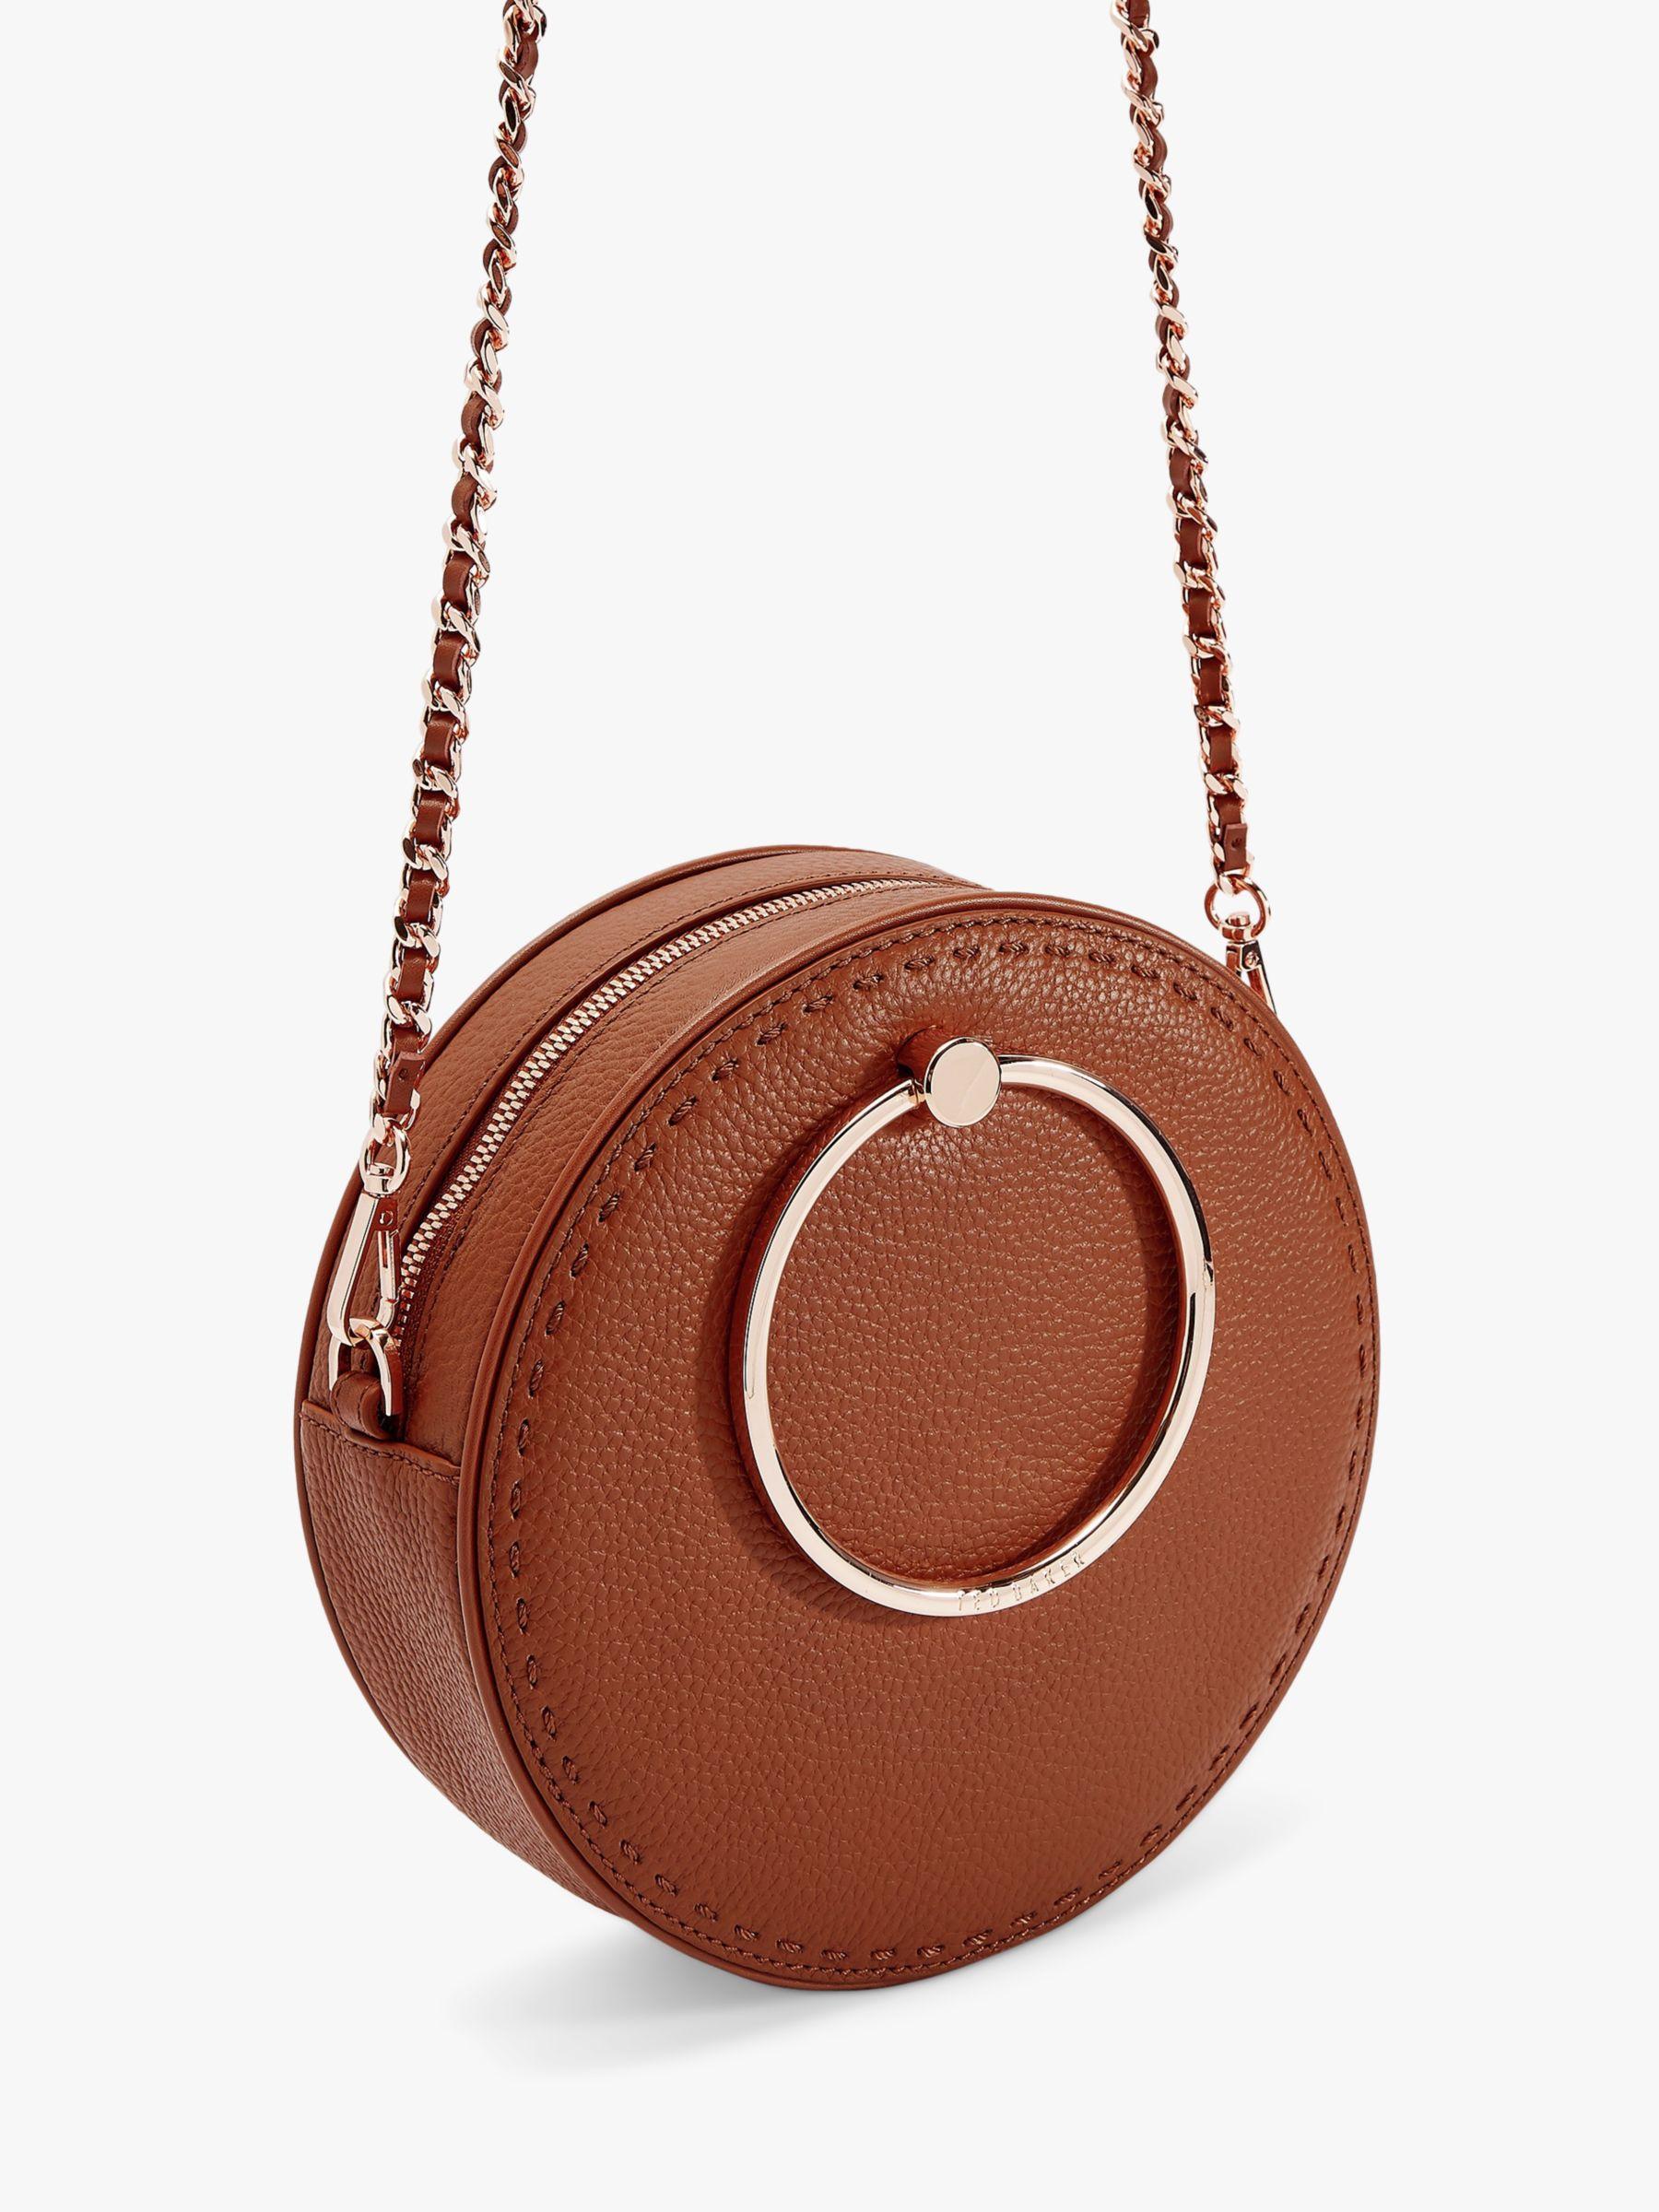 Ted Baker Maddie Circle Leather Crossbody Bag in Brown - Lyst